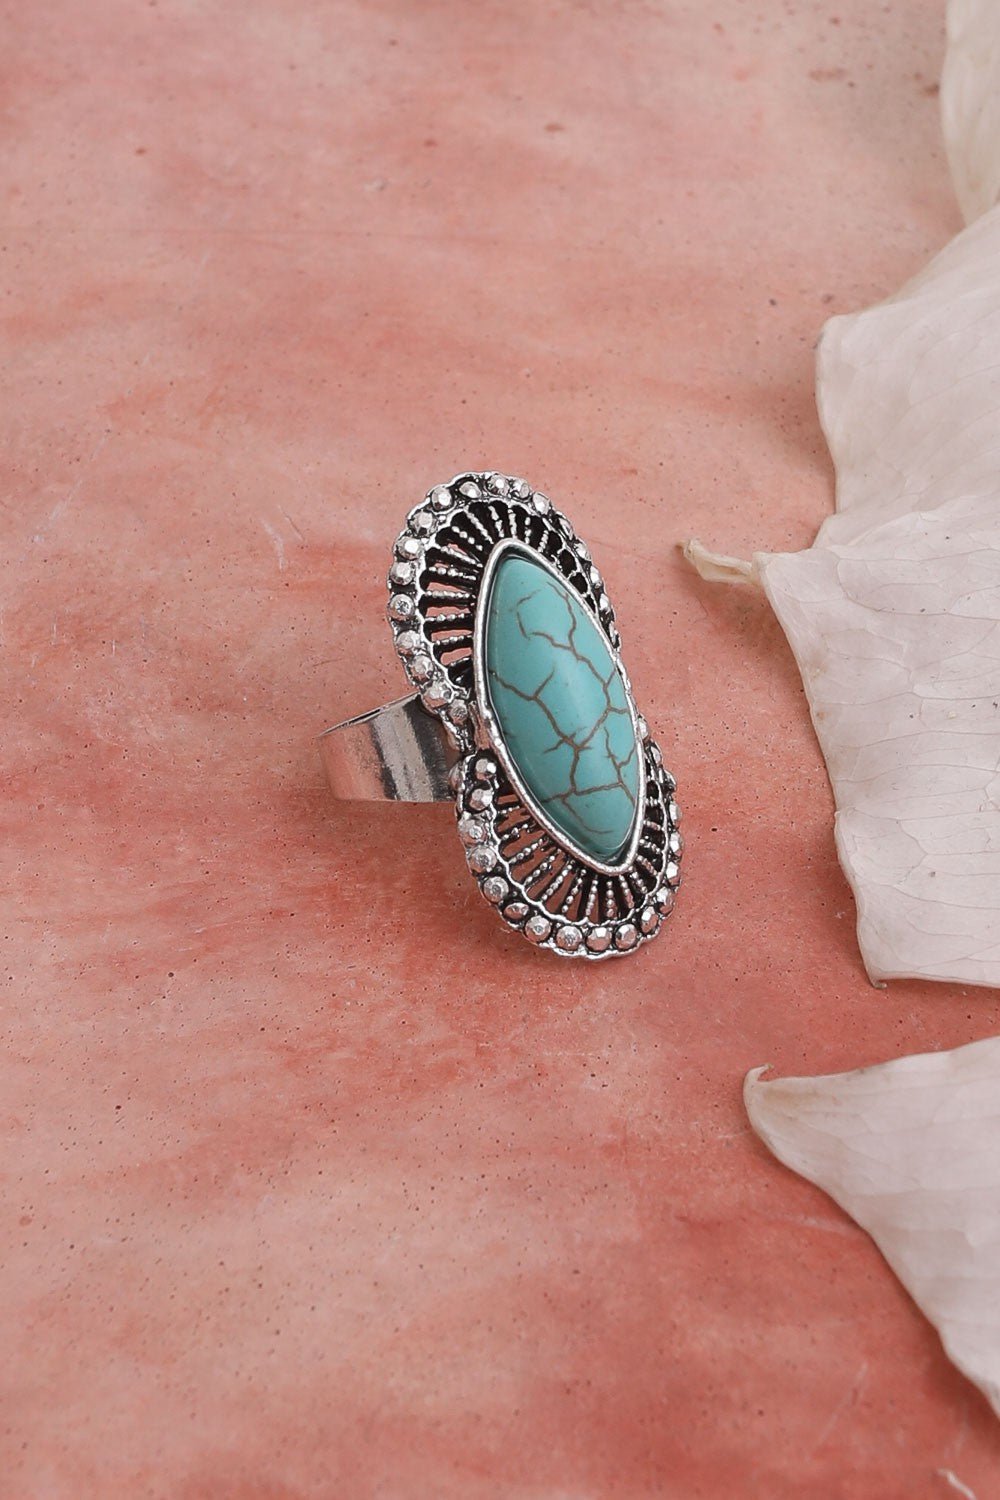 Western Hourglass Adjustable Turquoise Ring